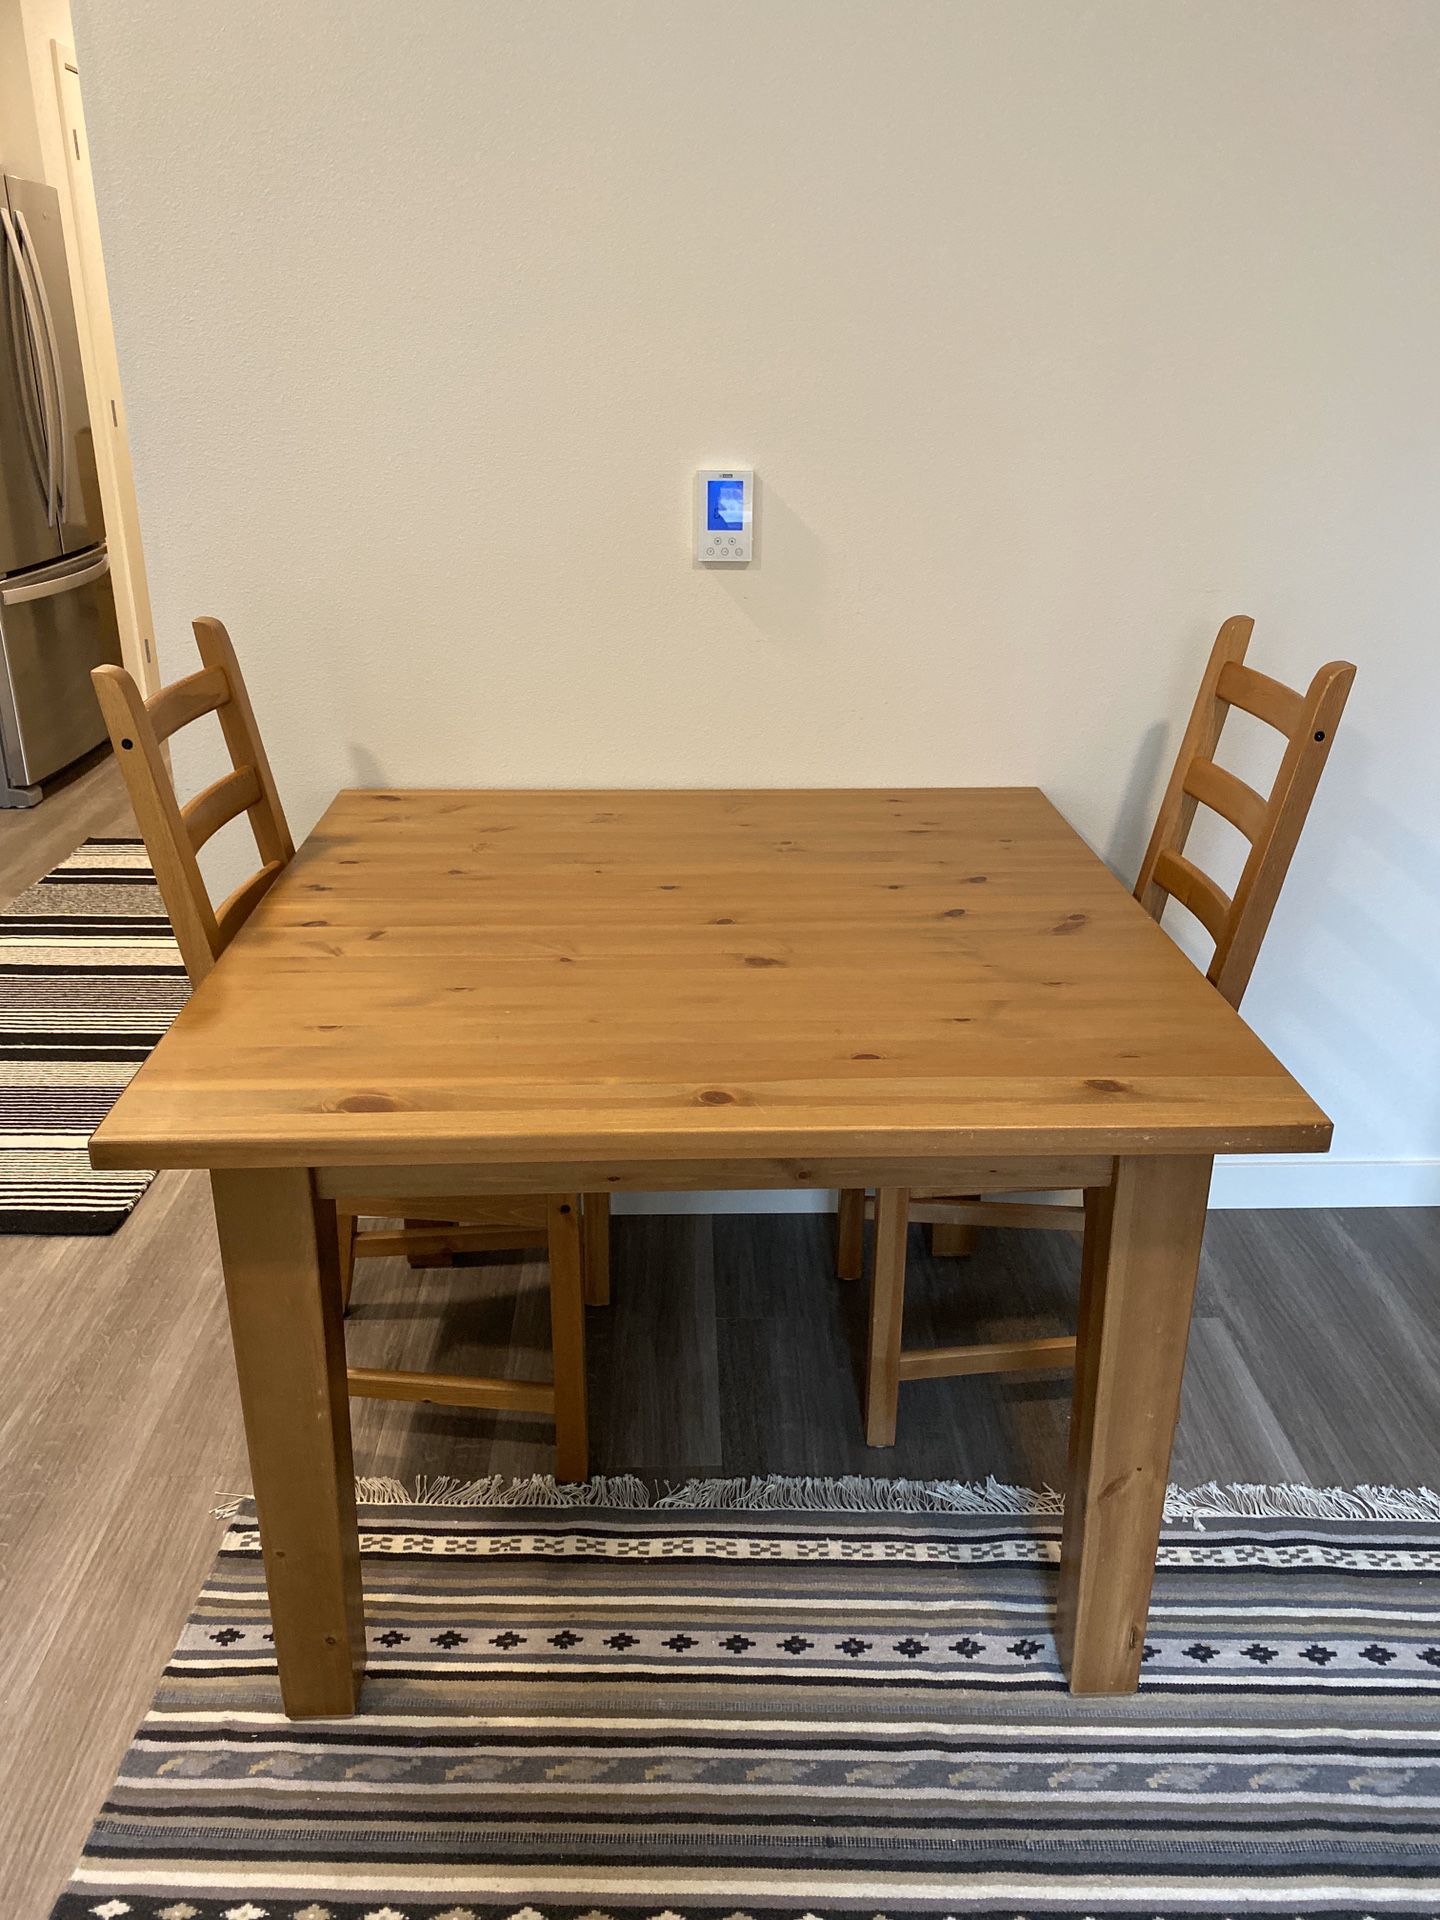 FREE! Must go today. Solid wood kitchen table and chairs